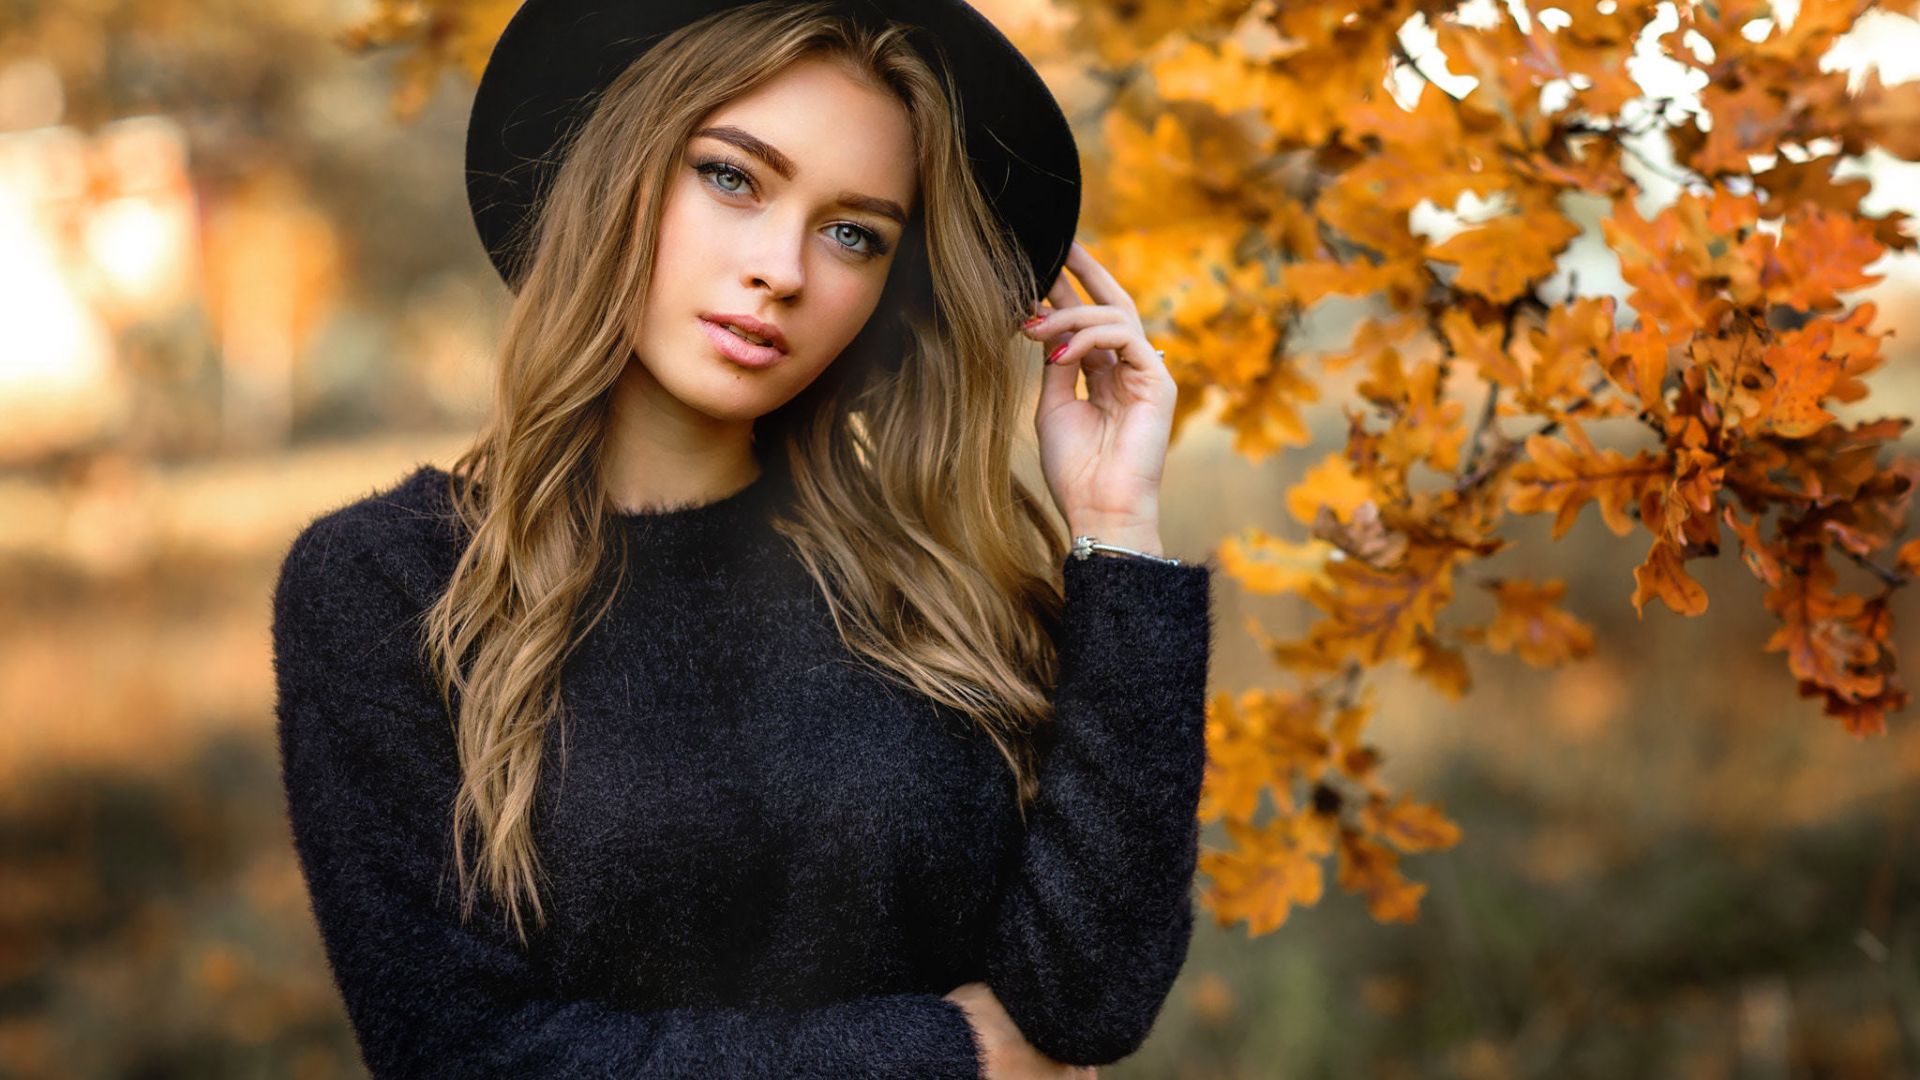 Wallpaper Gorgeous, girl model, black outfit, fall, outdoor